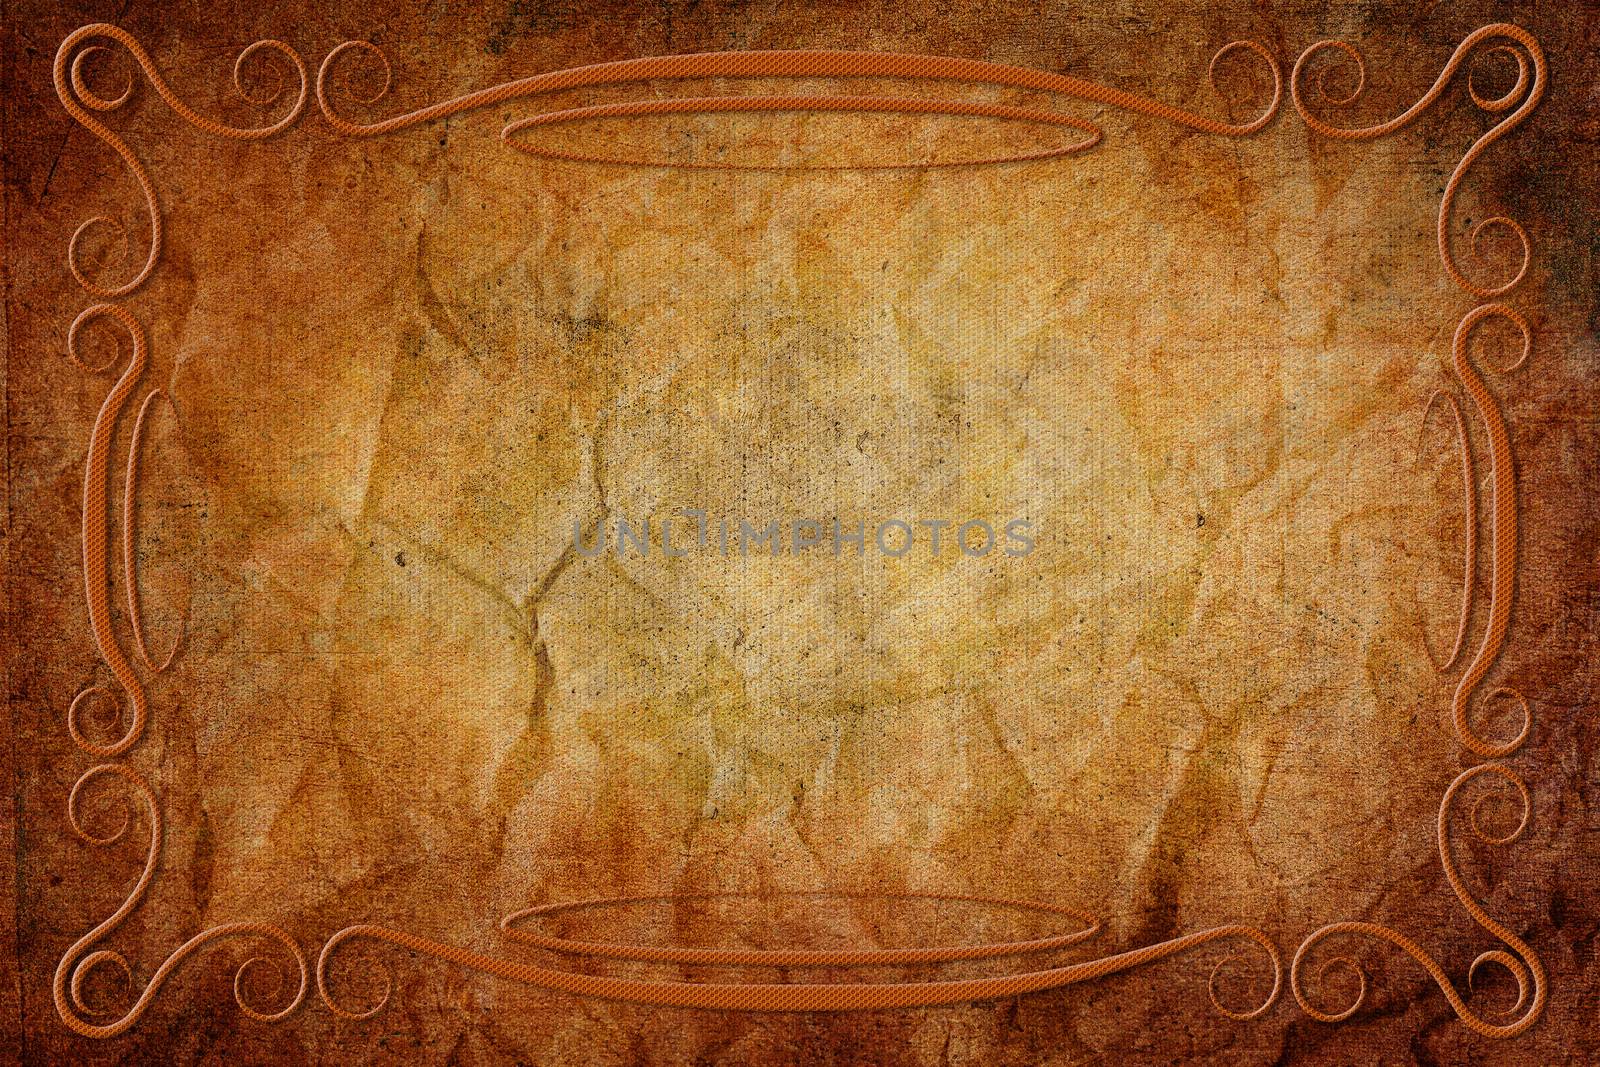 Antique Frame on Background With Parchment Texture by MaxalTamor